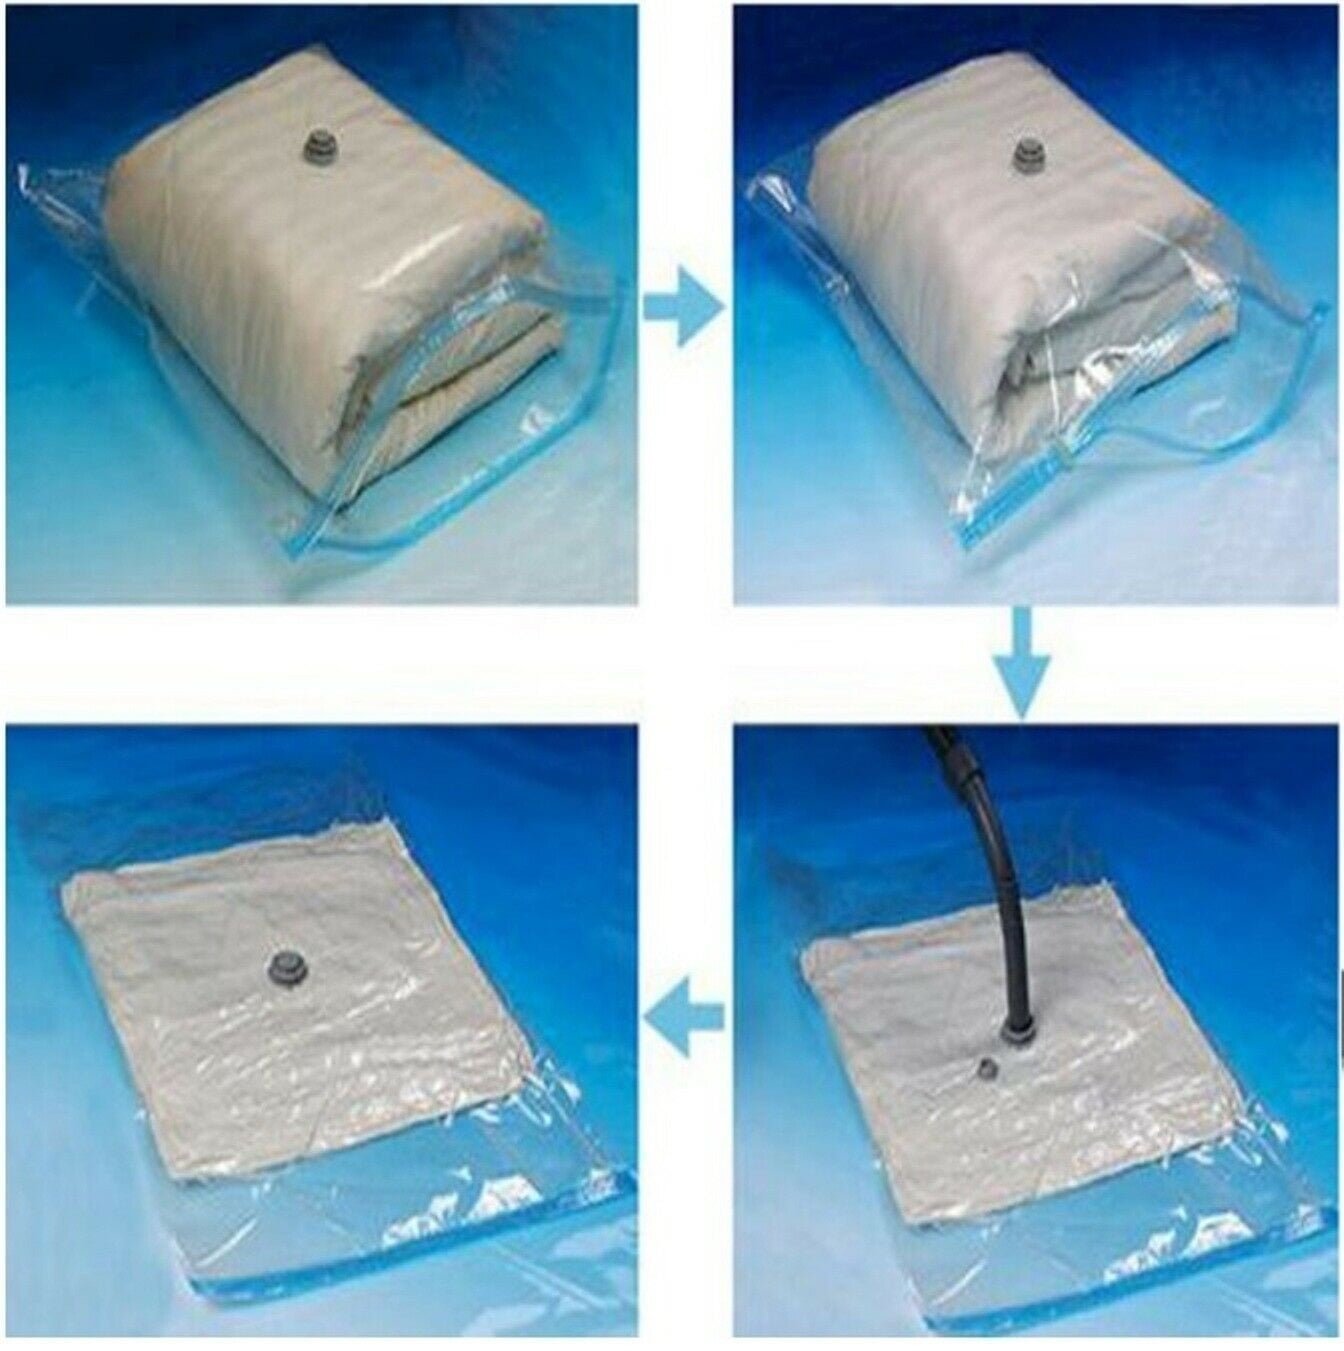  24 PACK The Largest Vacuum Seal Storage Bag Space Saver Jumbo  size Wholesale Deal : Home & Kitchen